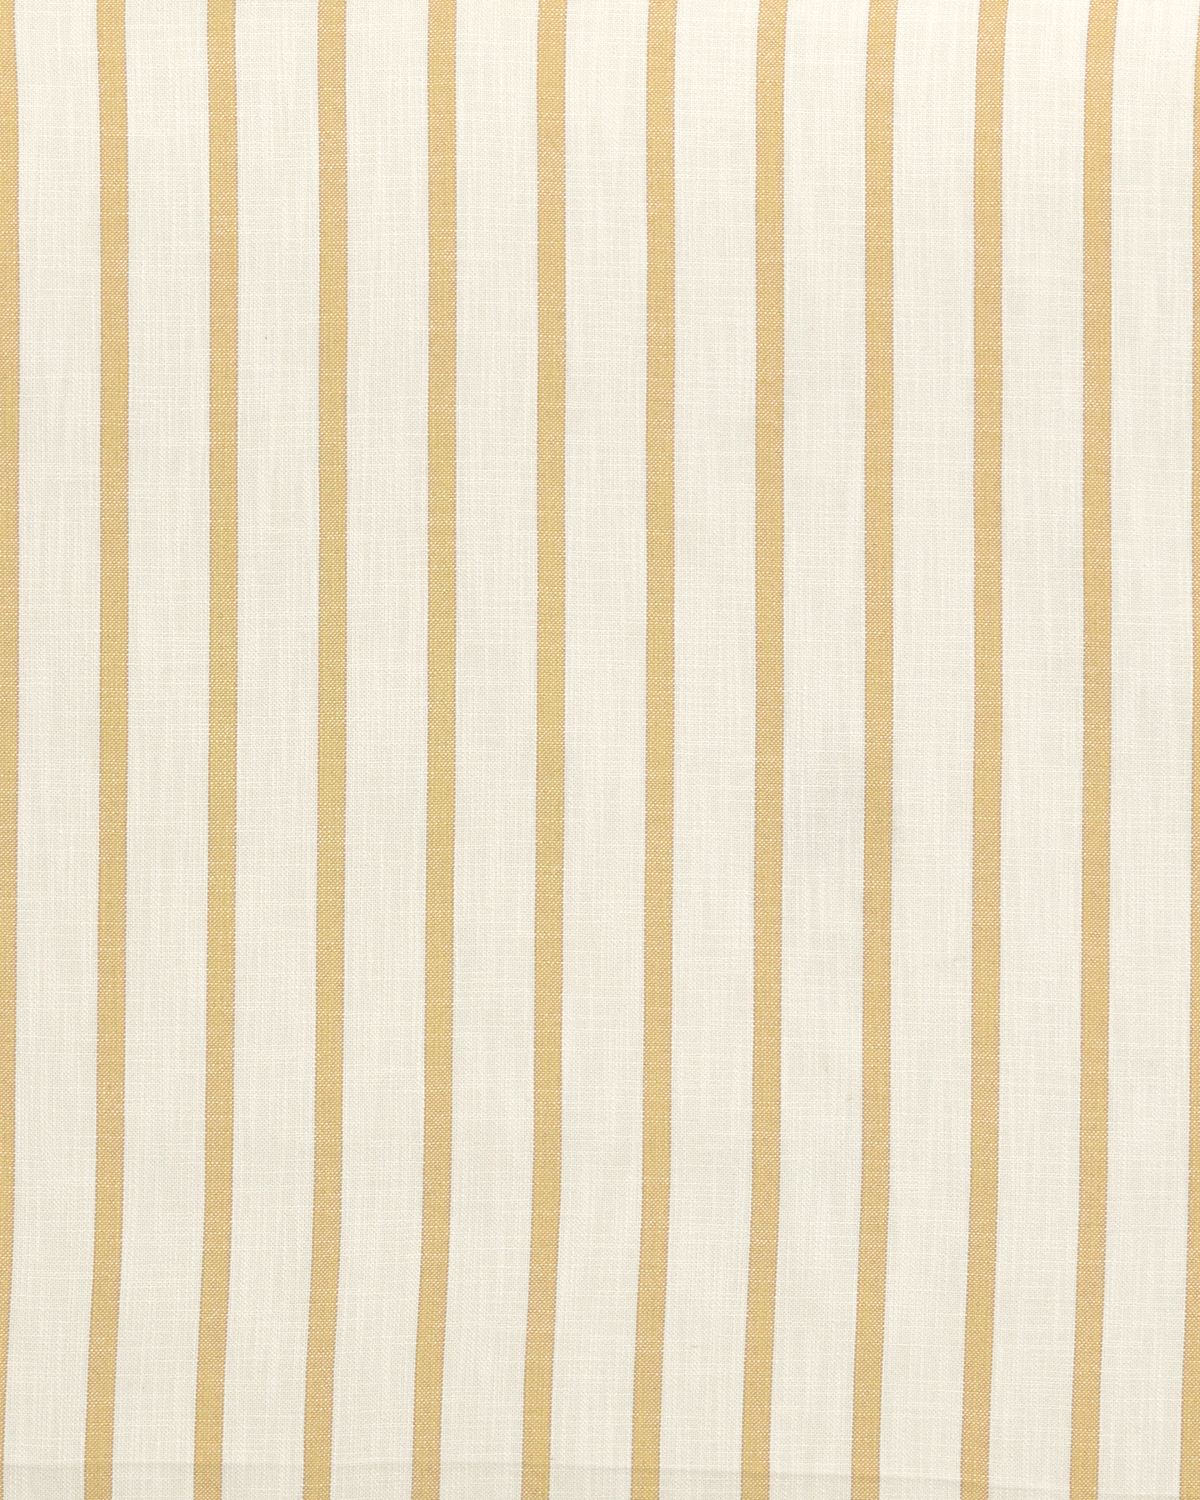 Beige/Gold Sparkle Loosely Woven Stripe Drapery Fabric, Fabric By the Yard